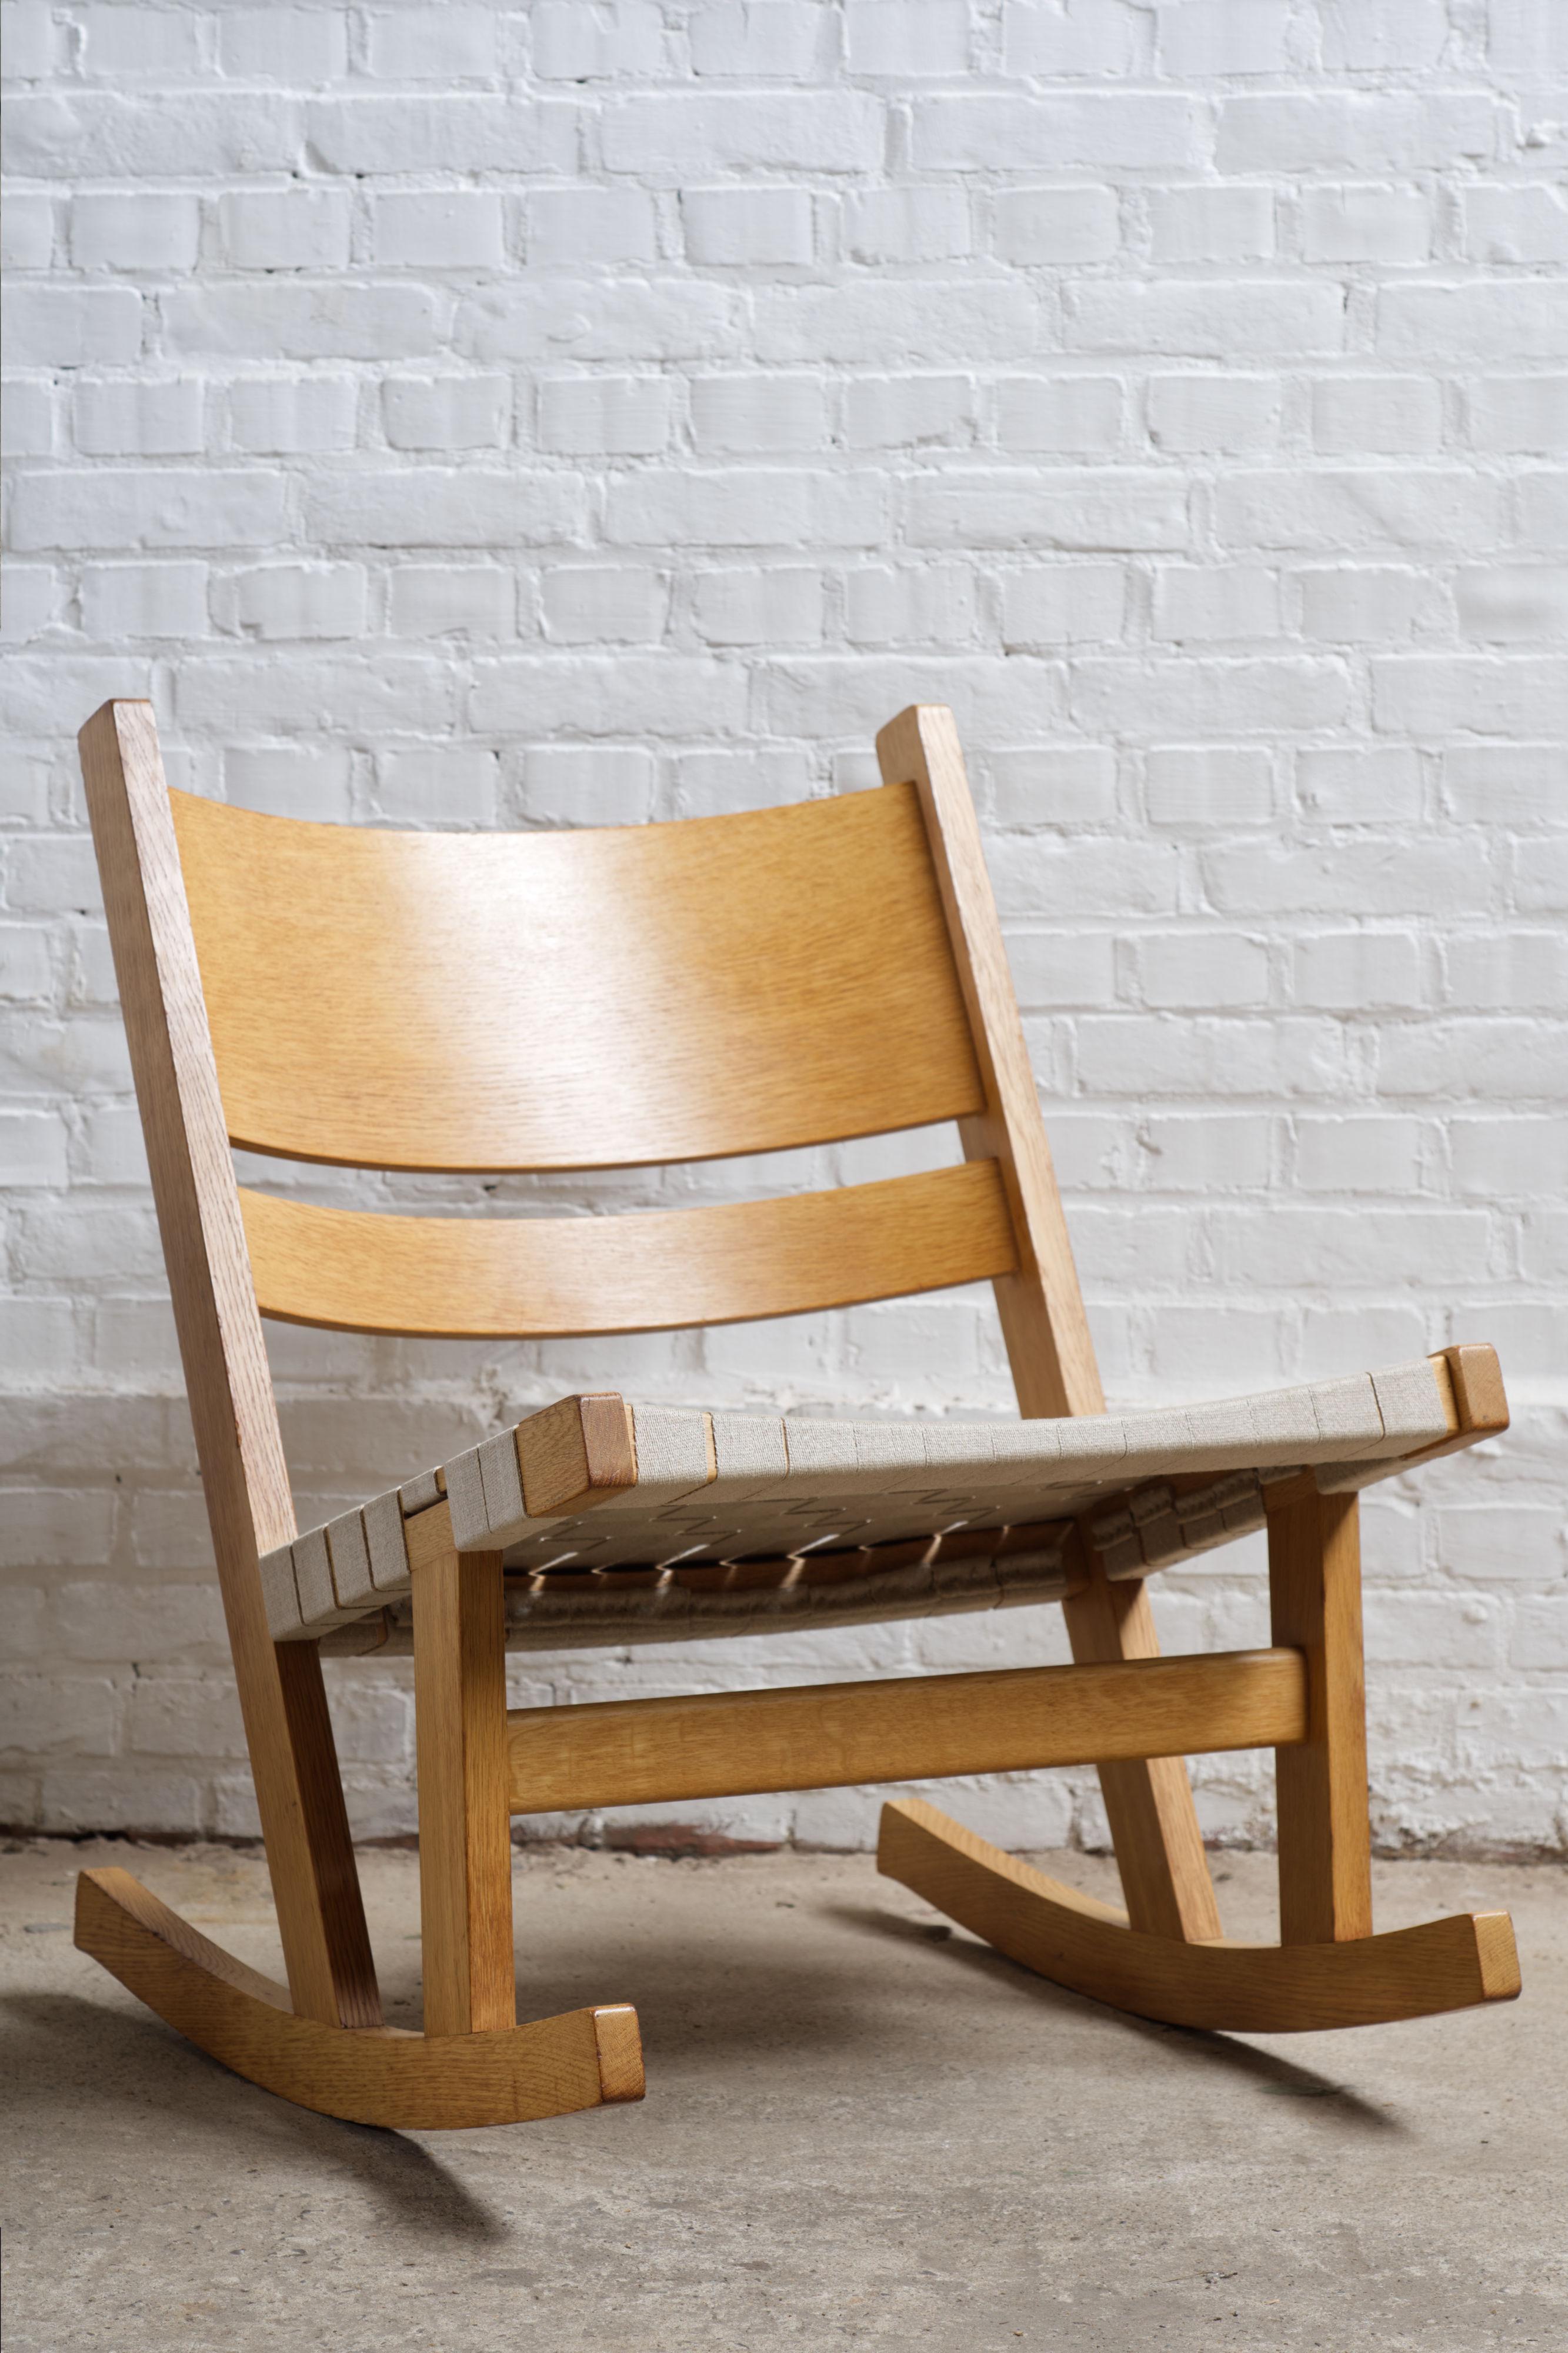 Rocking chair 'GE 674' by Hans wegner, Getame, 1970s For Sale 3